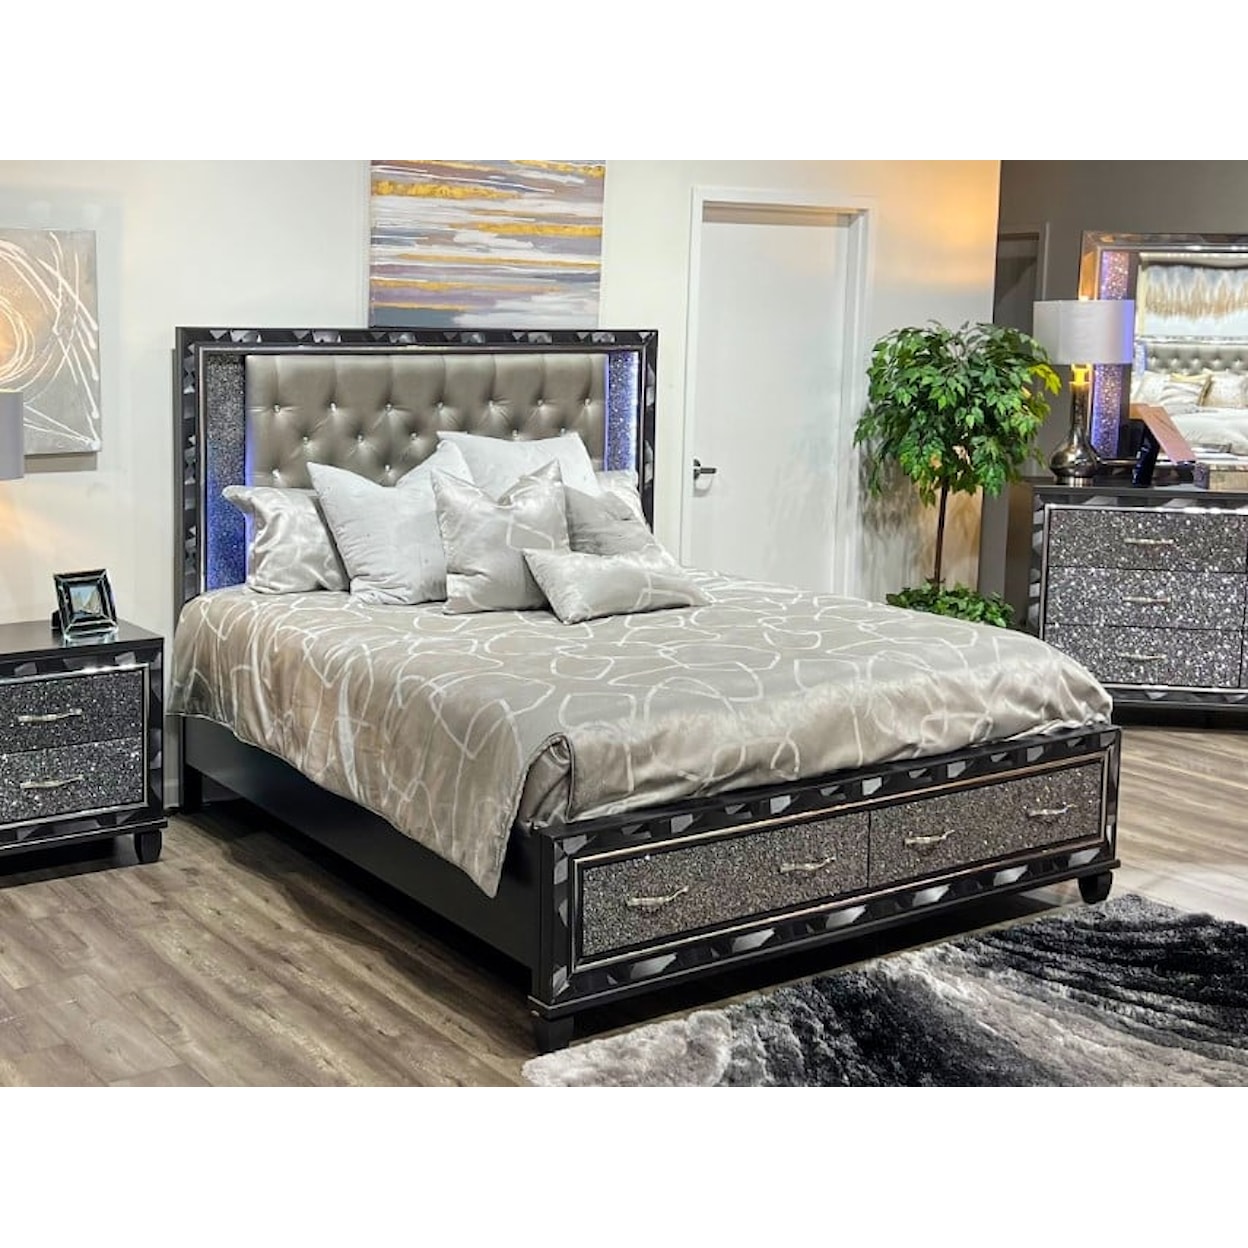 New Classic Radiance Glam Queen Bed w/Storage Footboard & Rails